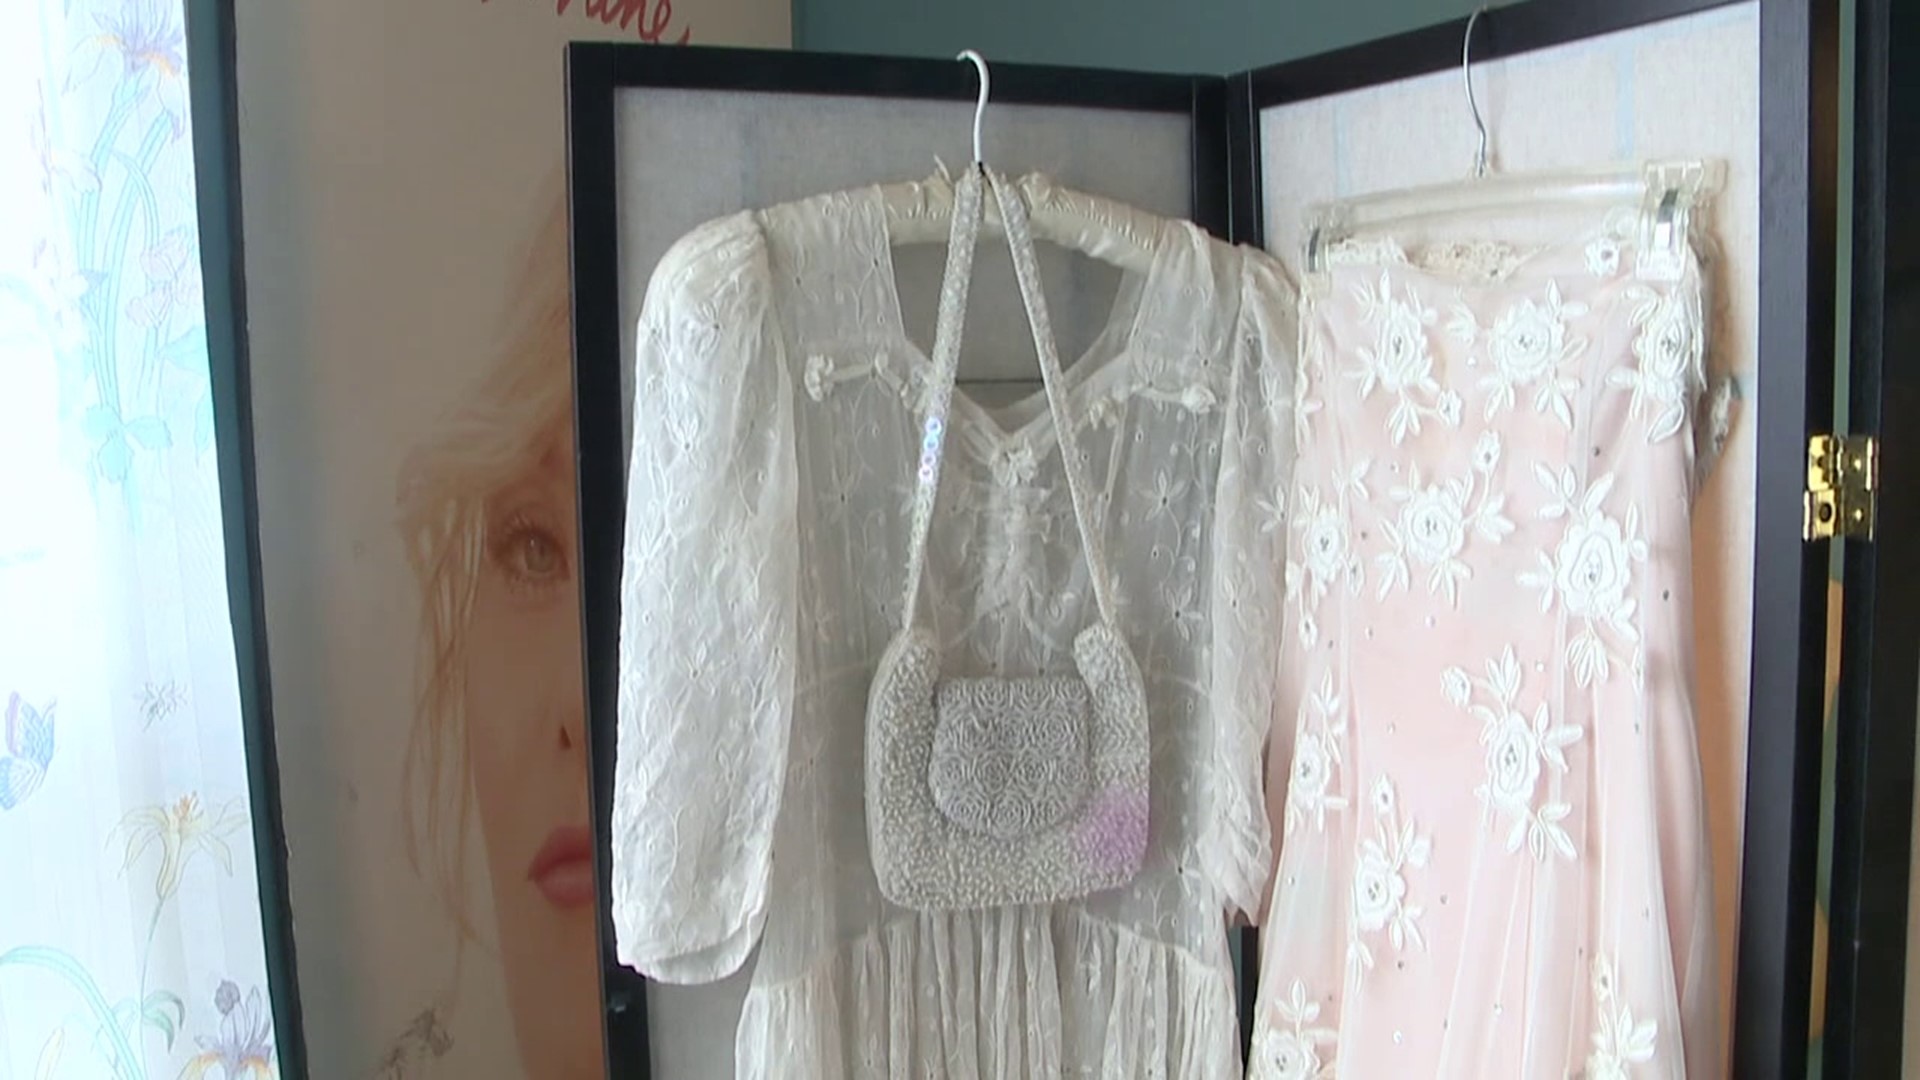 Yesterday, we went through a rollercoaster of emotions with a consignment shop owner in Wilkes-Barre who thought she had lost a special family heirloom forever.